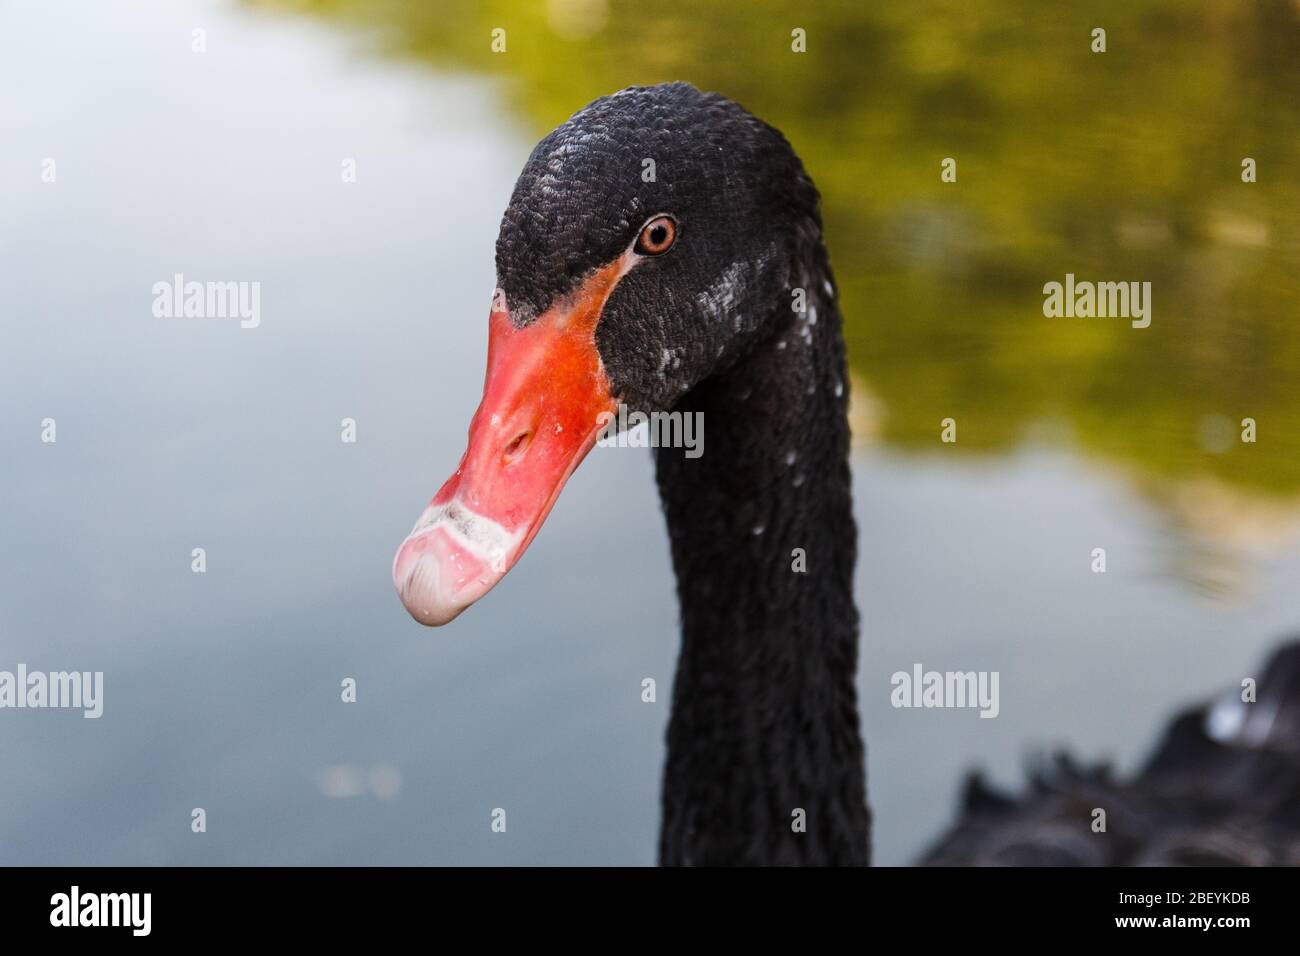 Black swan close up portrait in the pond Stock Photo